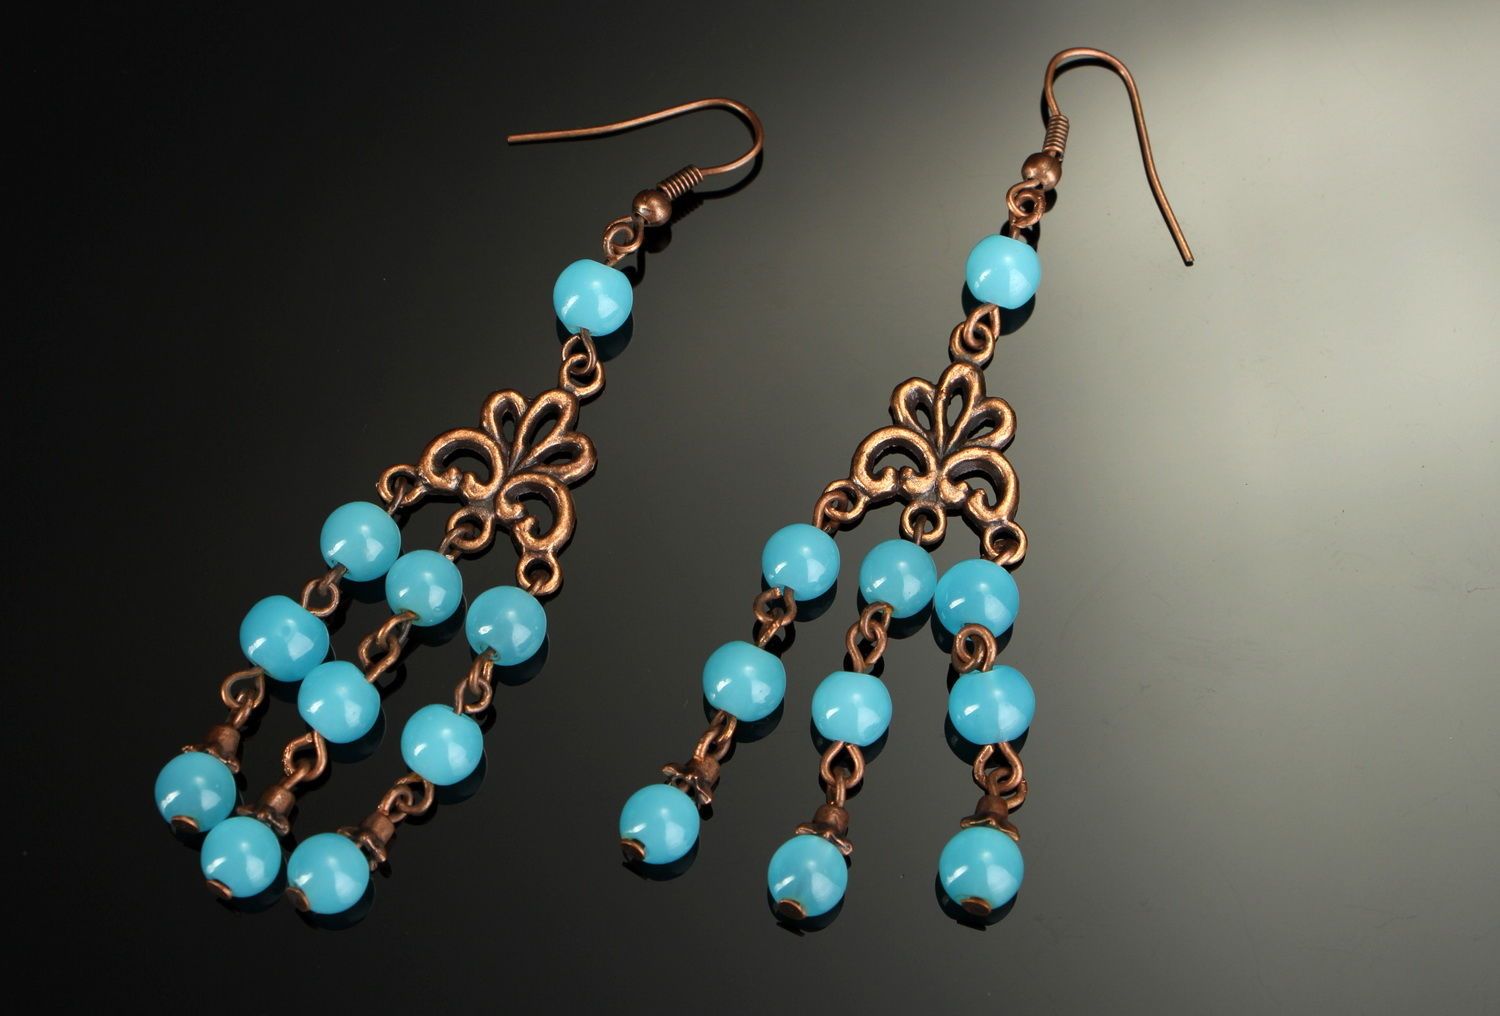 Long hanging earrings made of copper and glass photo 1